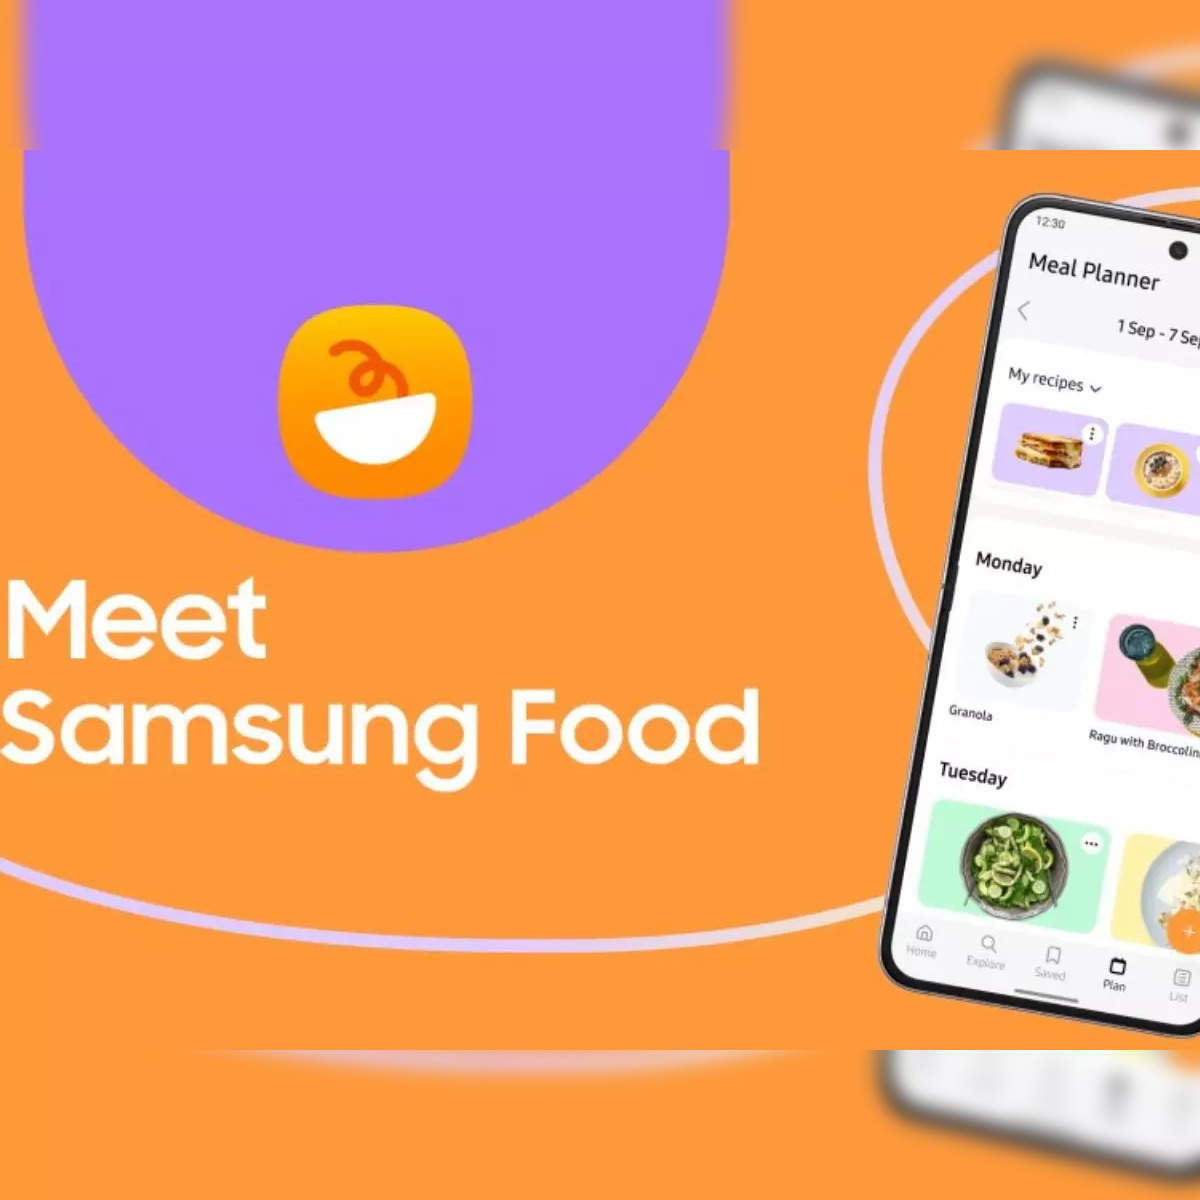 Samsung just made a hot virtual assistant named Sam, and in one